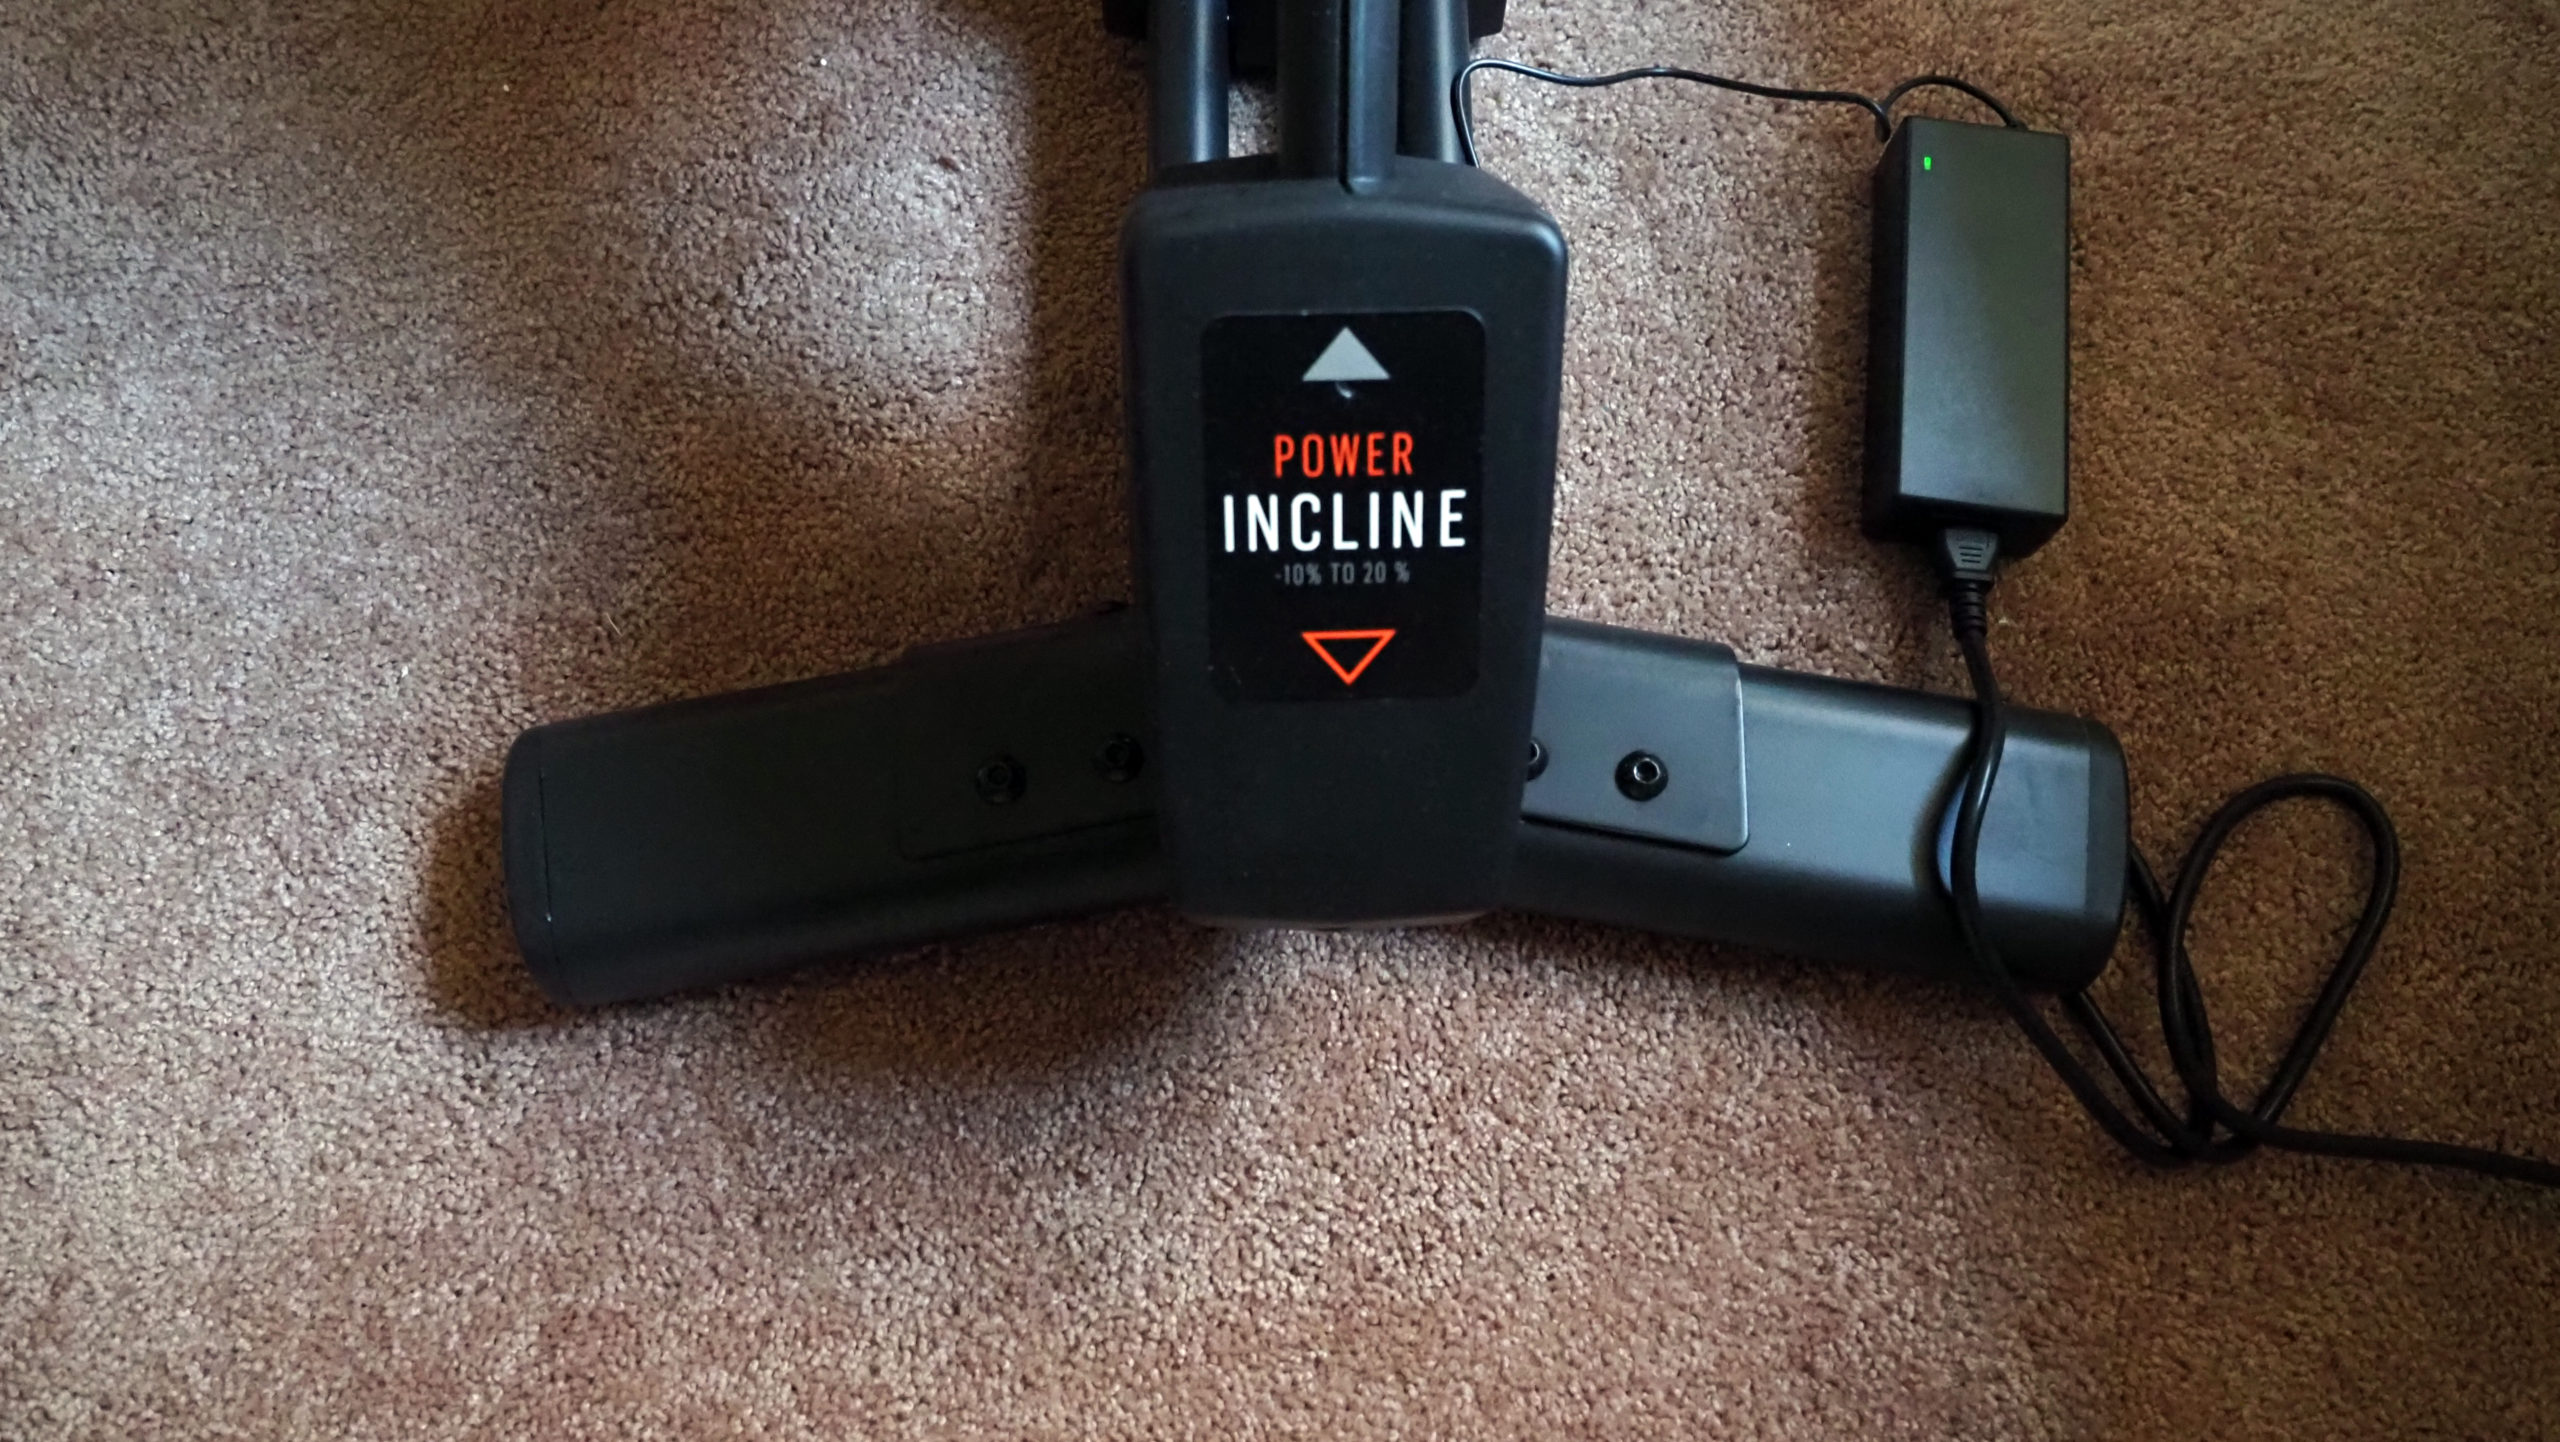 Incline is a huge differentiator over other pricey connected bikes. (Photo: Caitlin McGarry/Gizmodo)